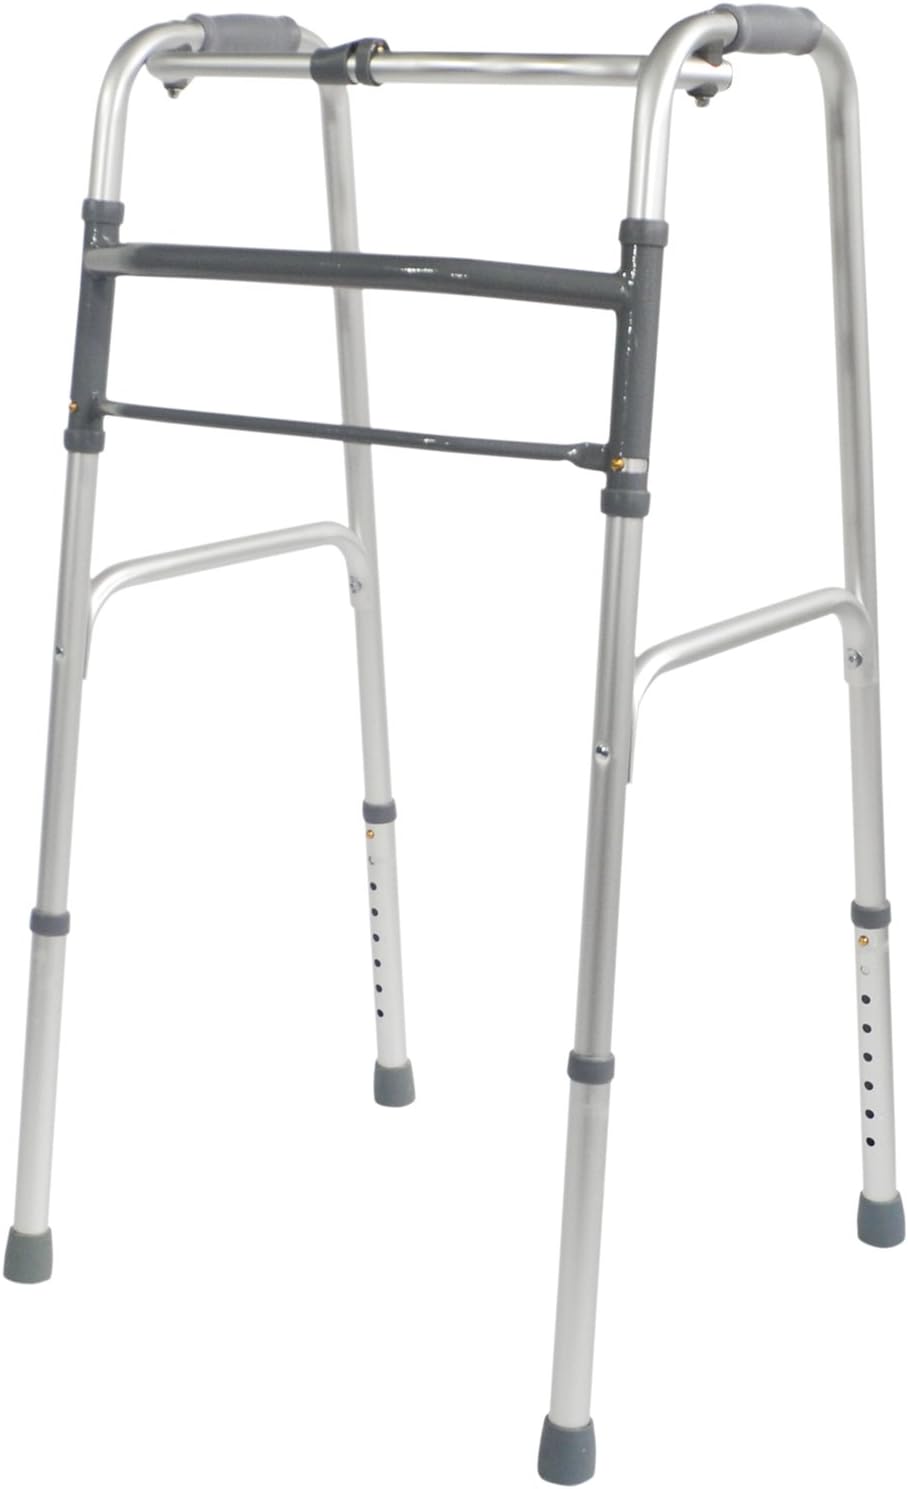 Best Walking Frame: Top Picks for Stability and Comfort